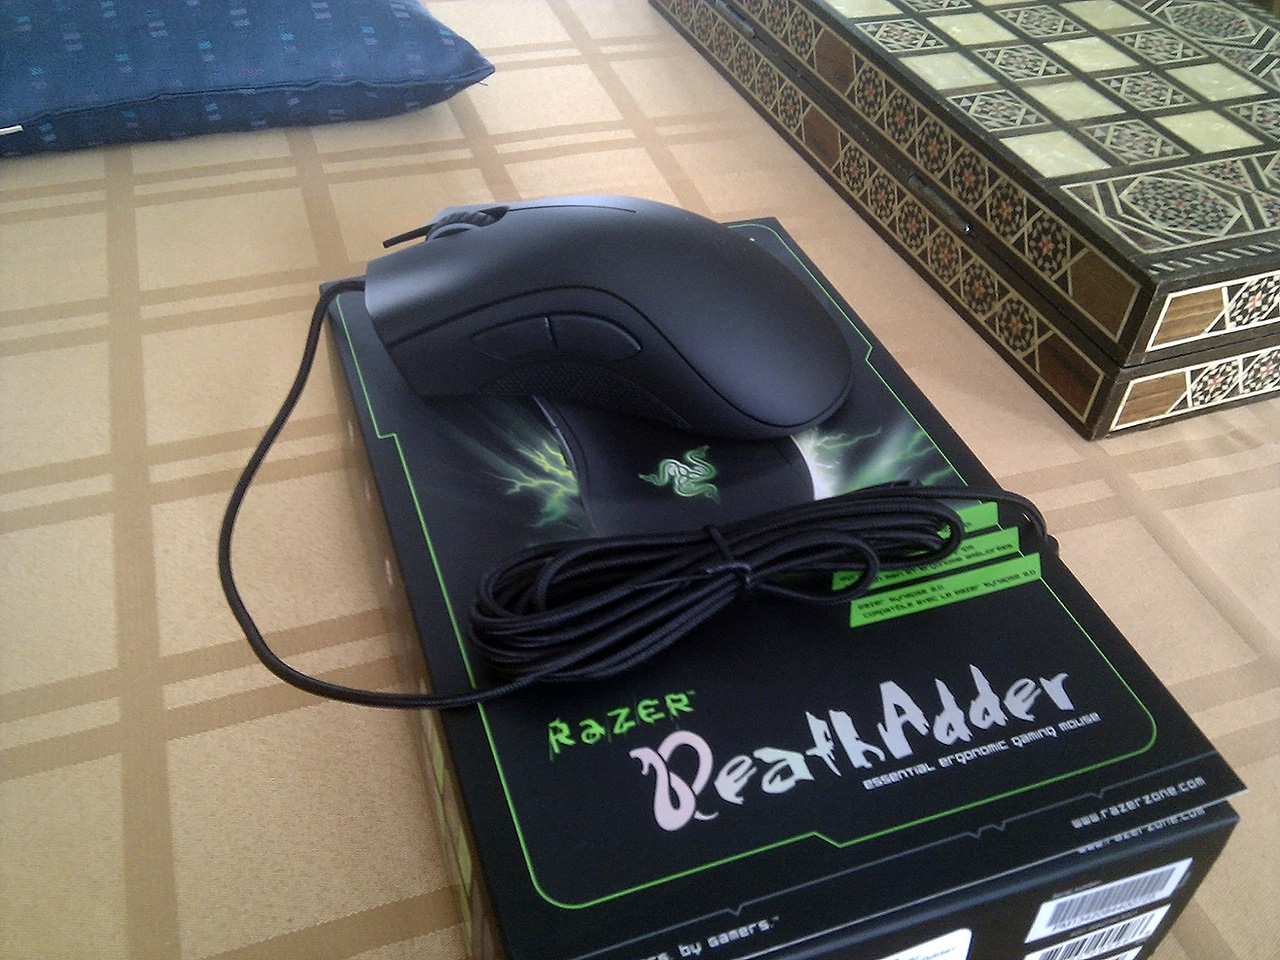 The DeathAdder unboxed.